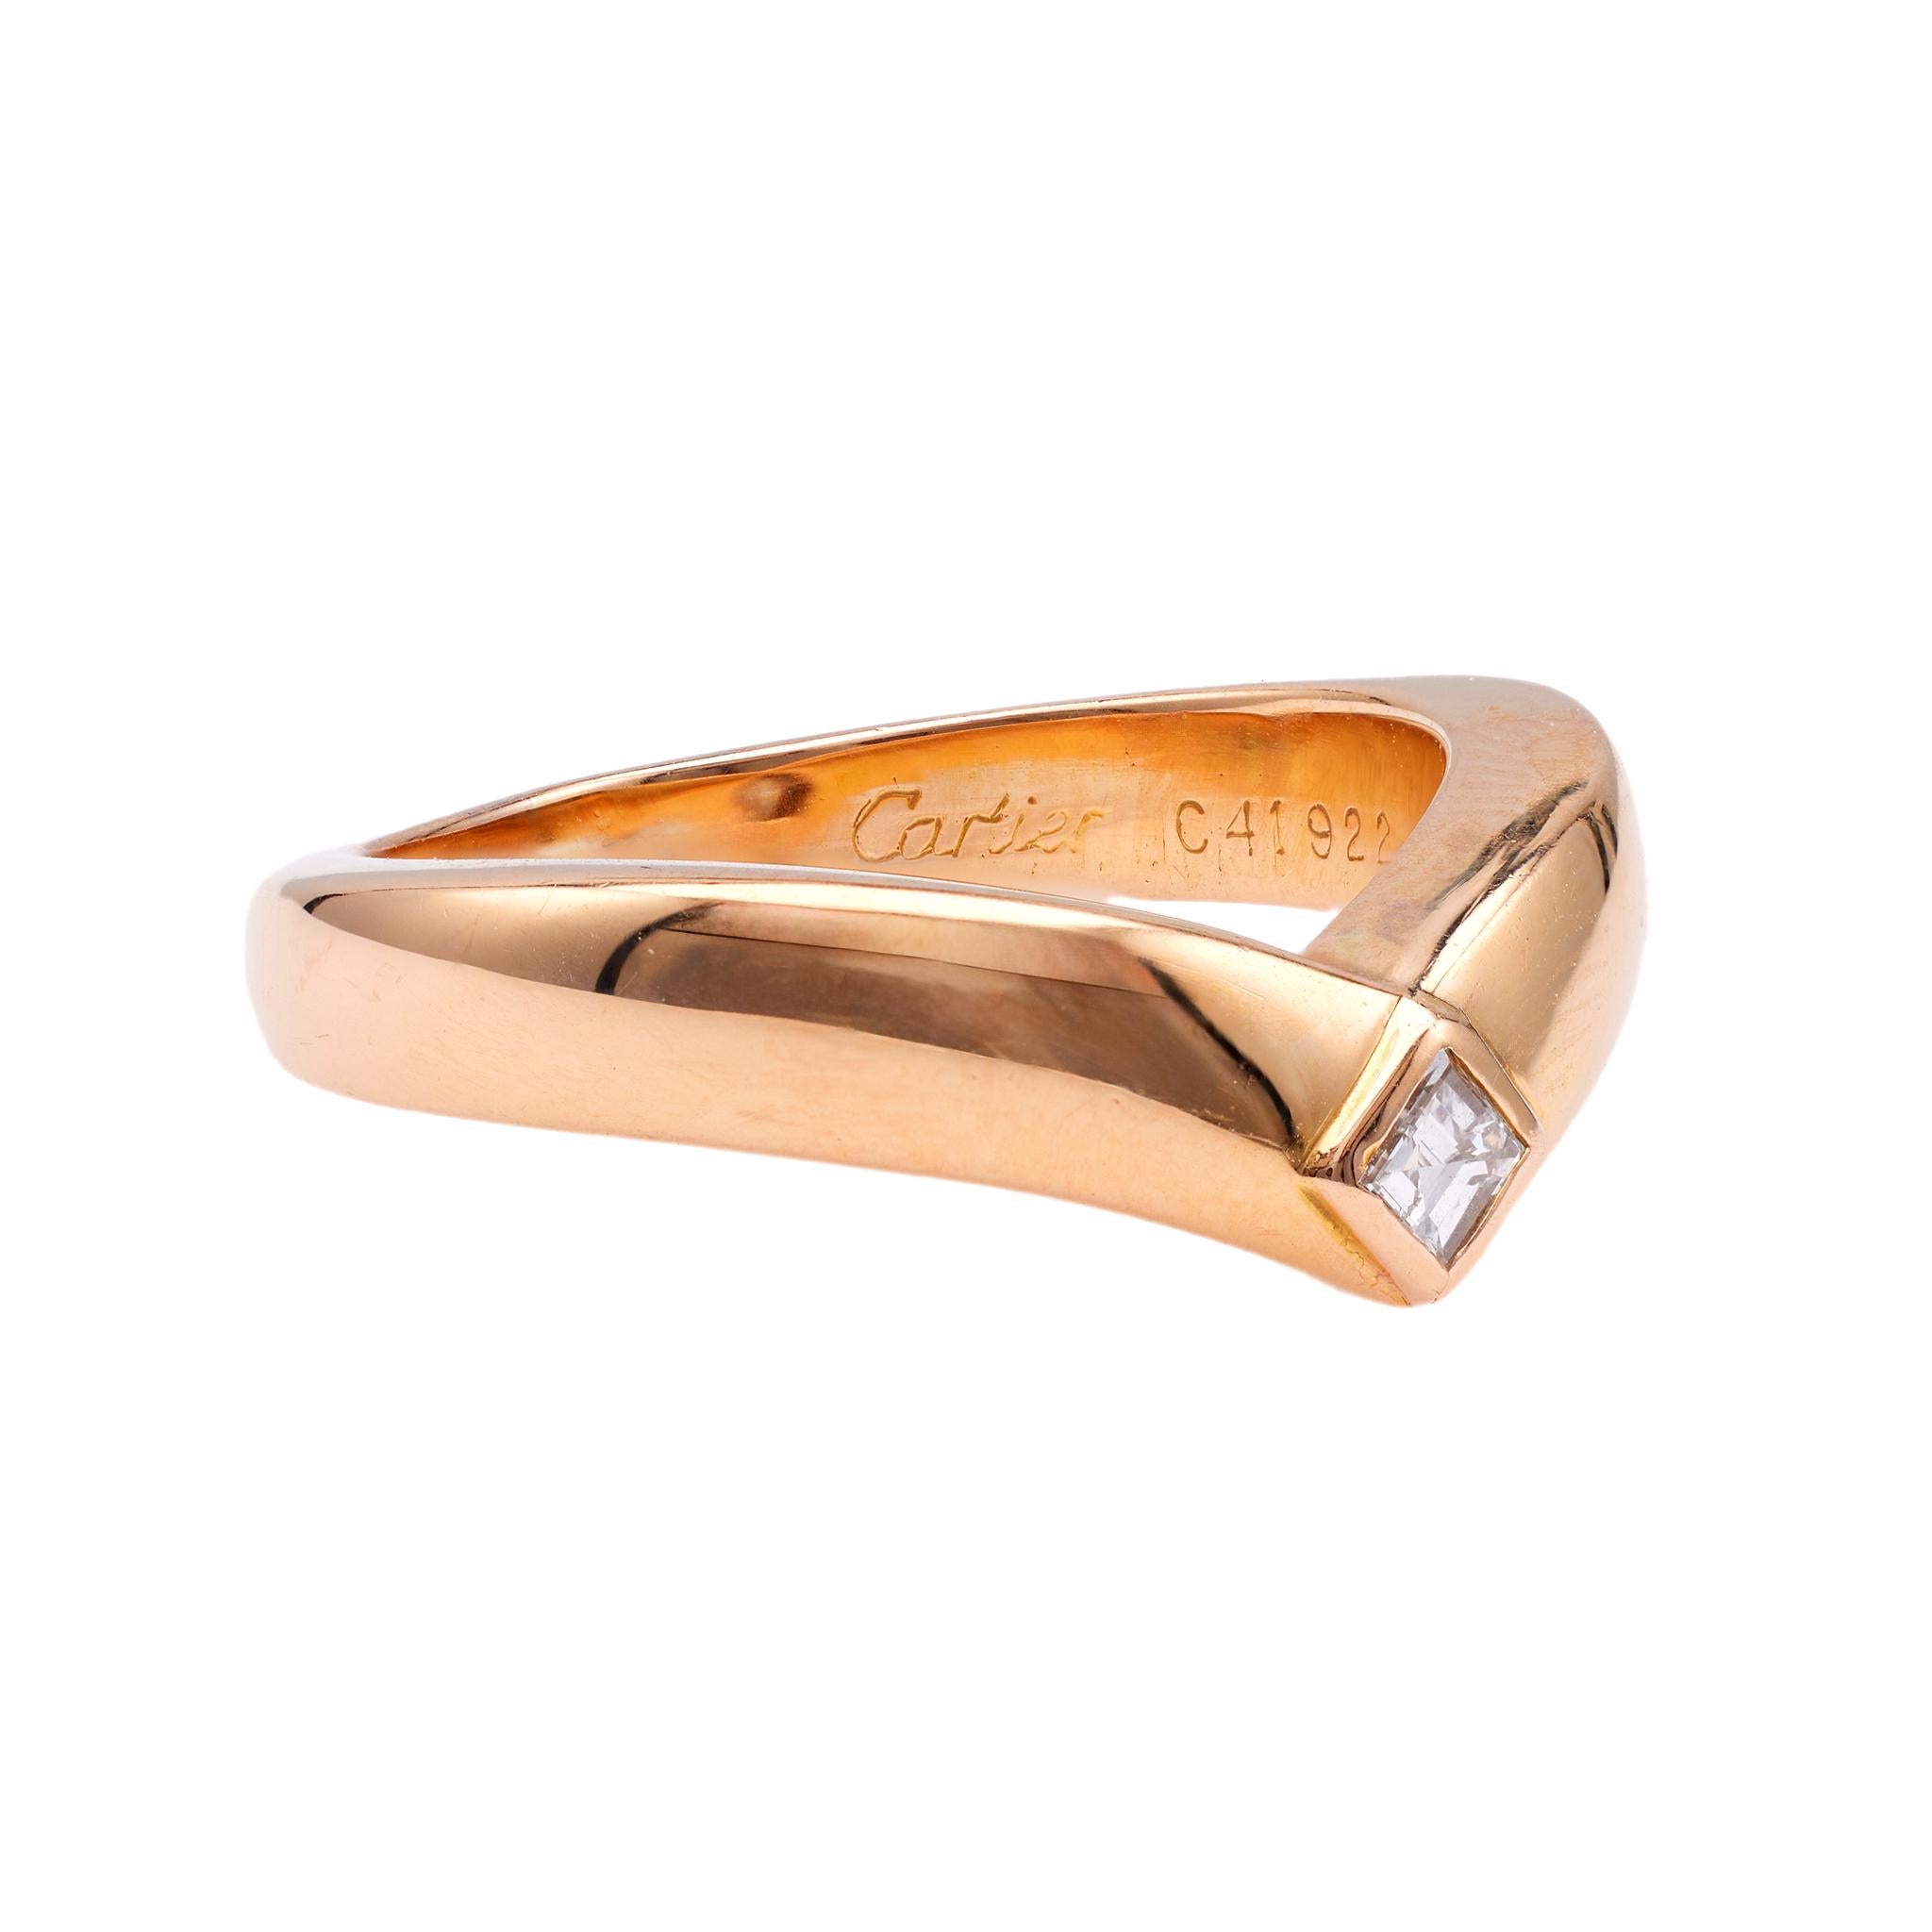 Vintage Cartier Diamond 18k Rose Gold Chevron Band Ring In Good Condition For Sale In Beverly Hills, CA